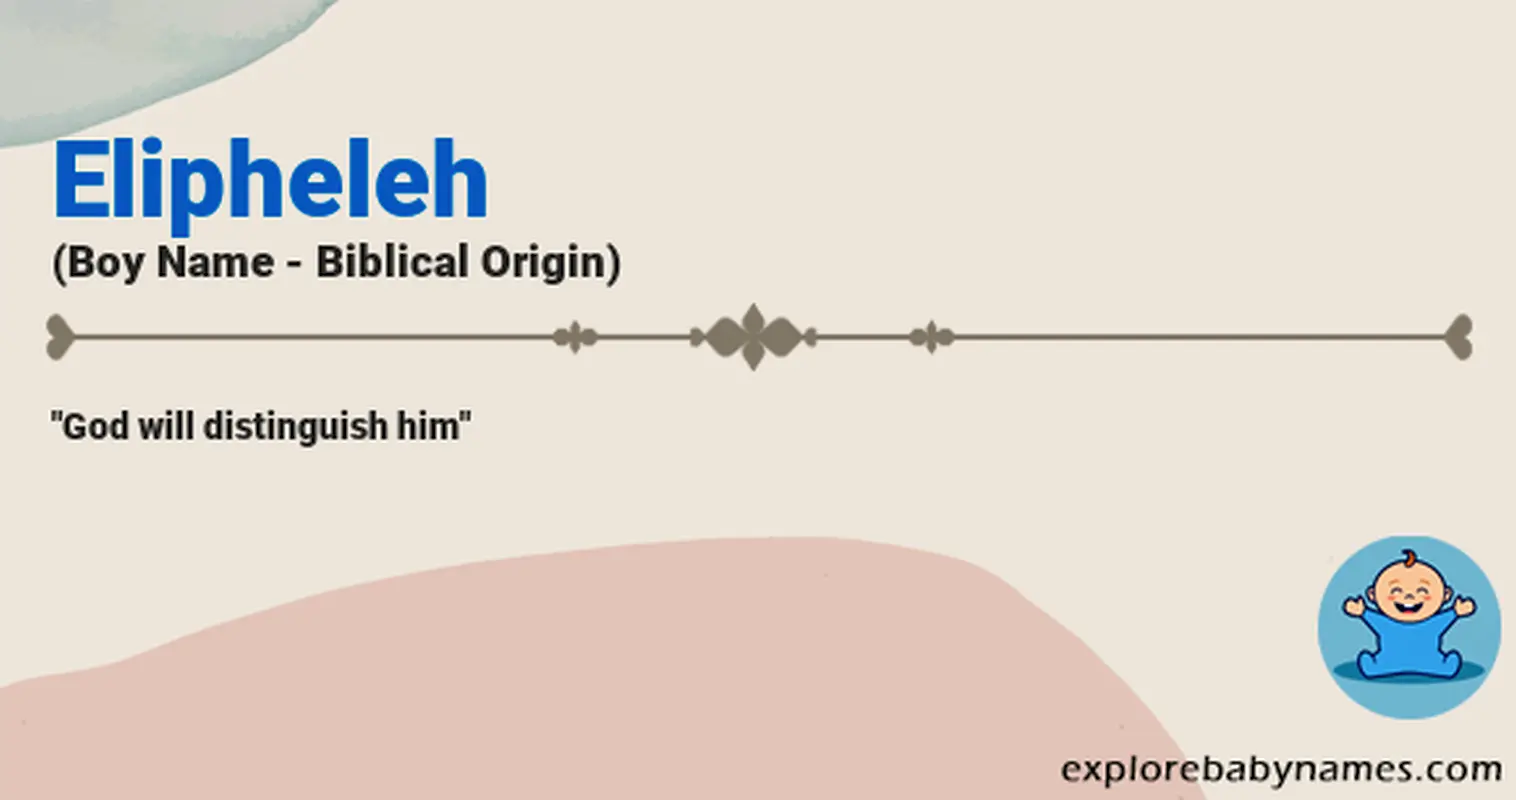 Meaning of Elipheleh